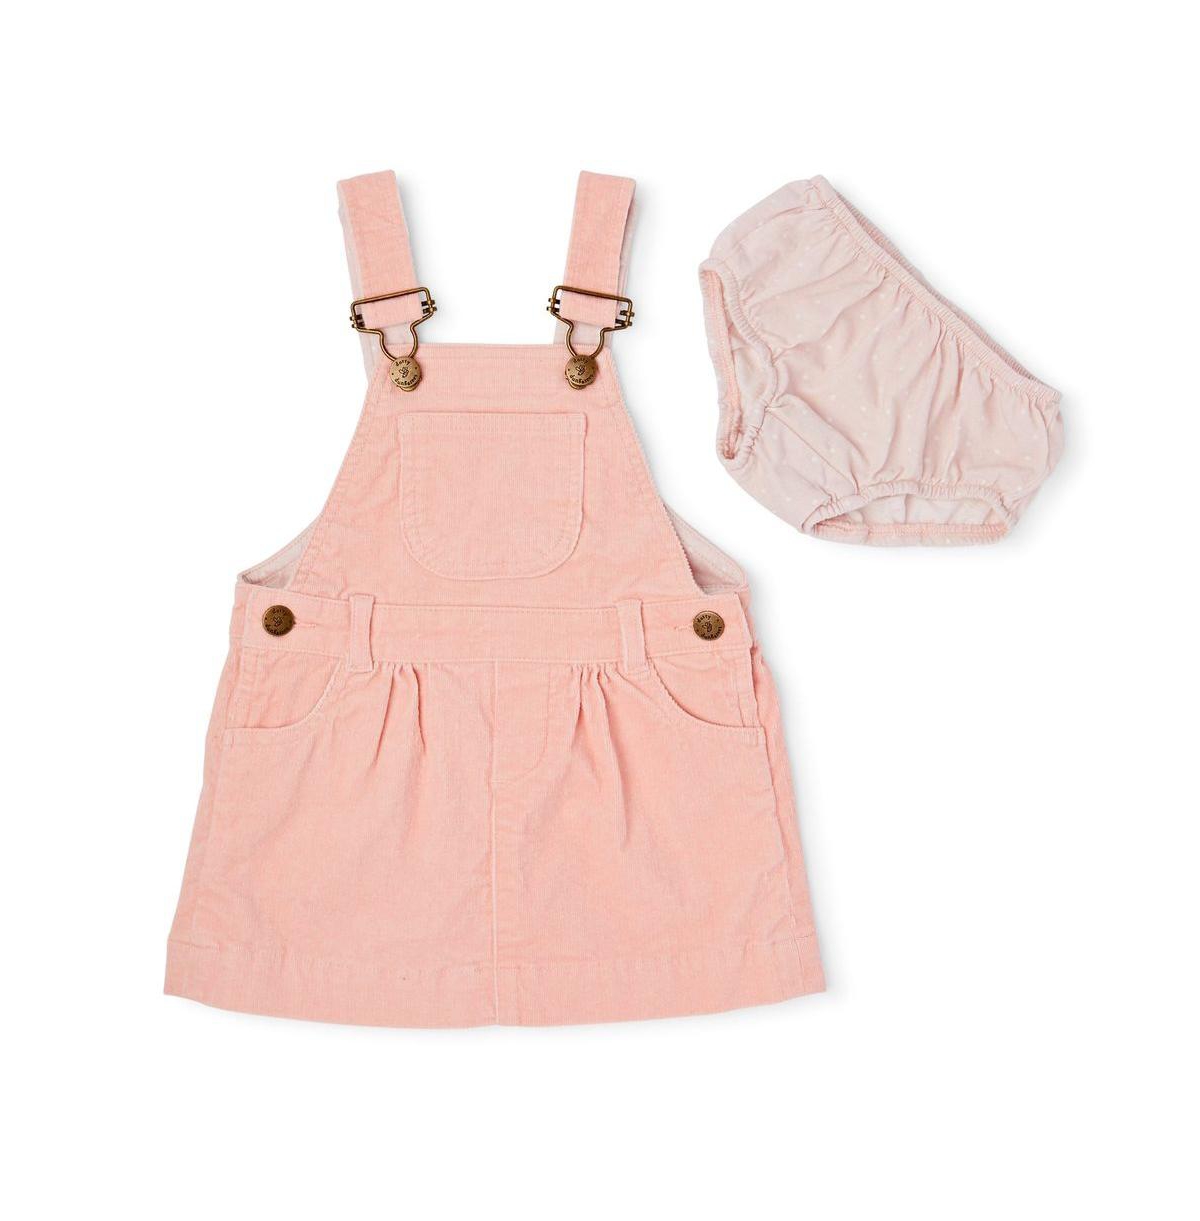 Dotty Dungarees Child Girl Corduroy Overall Dress In Old Rose